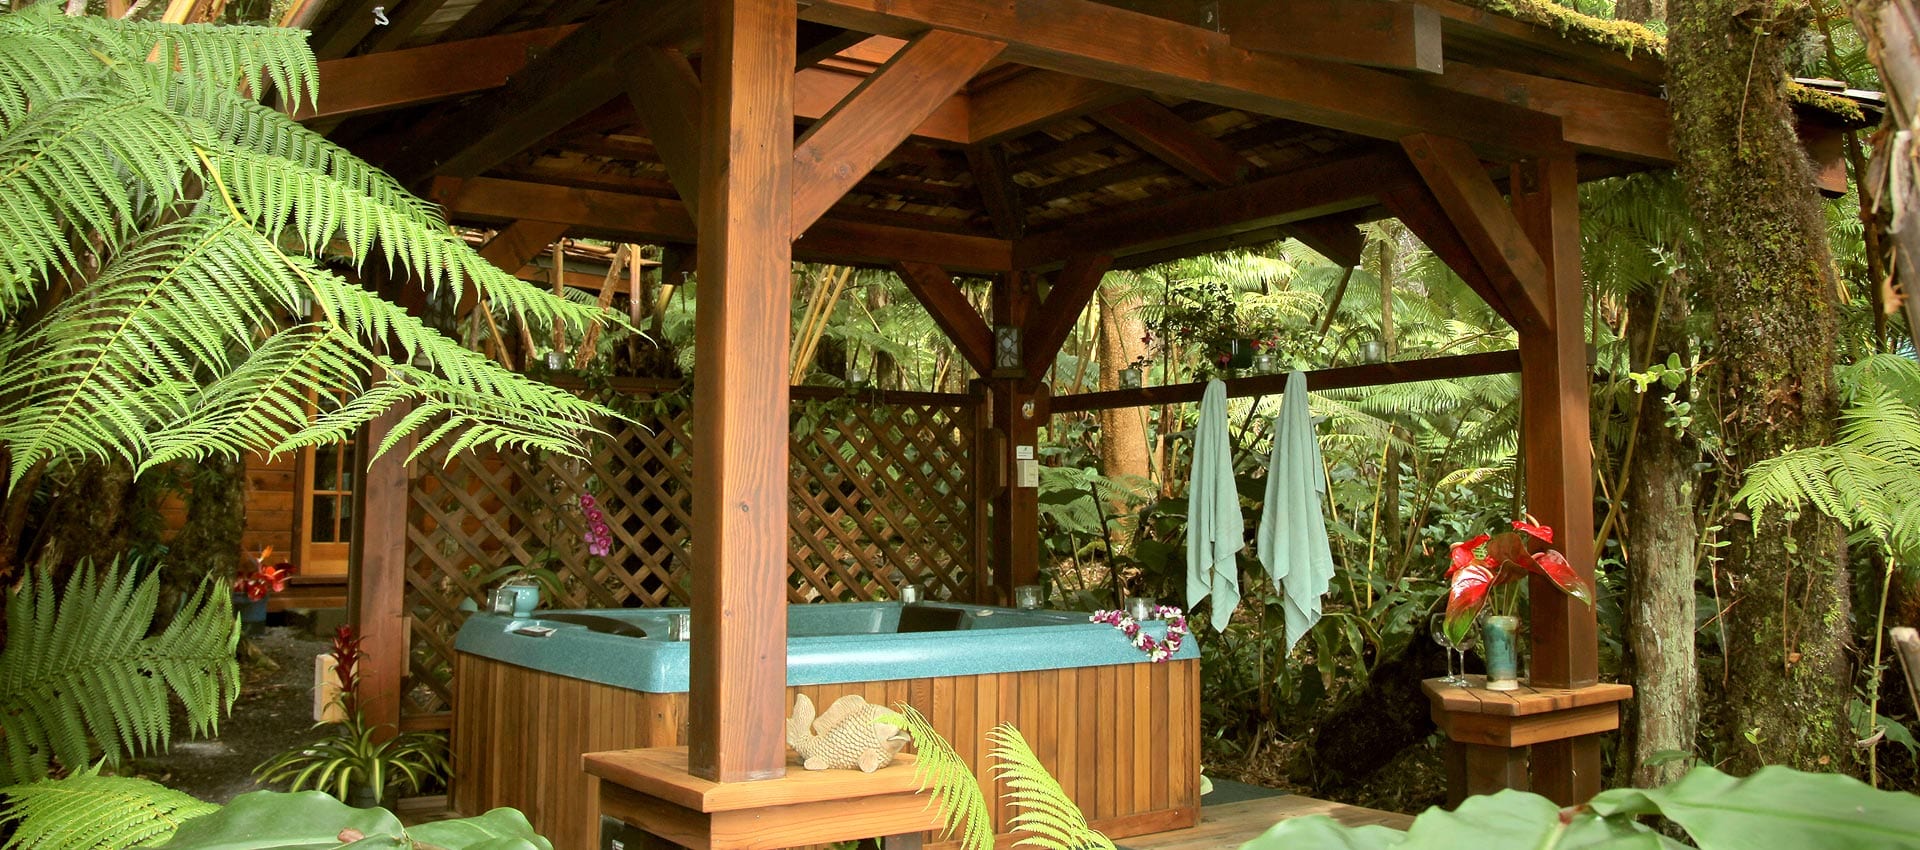 Forest House relaxing jacuzzi hot tub